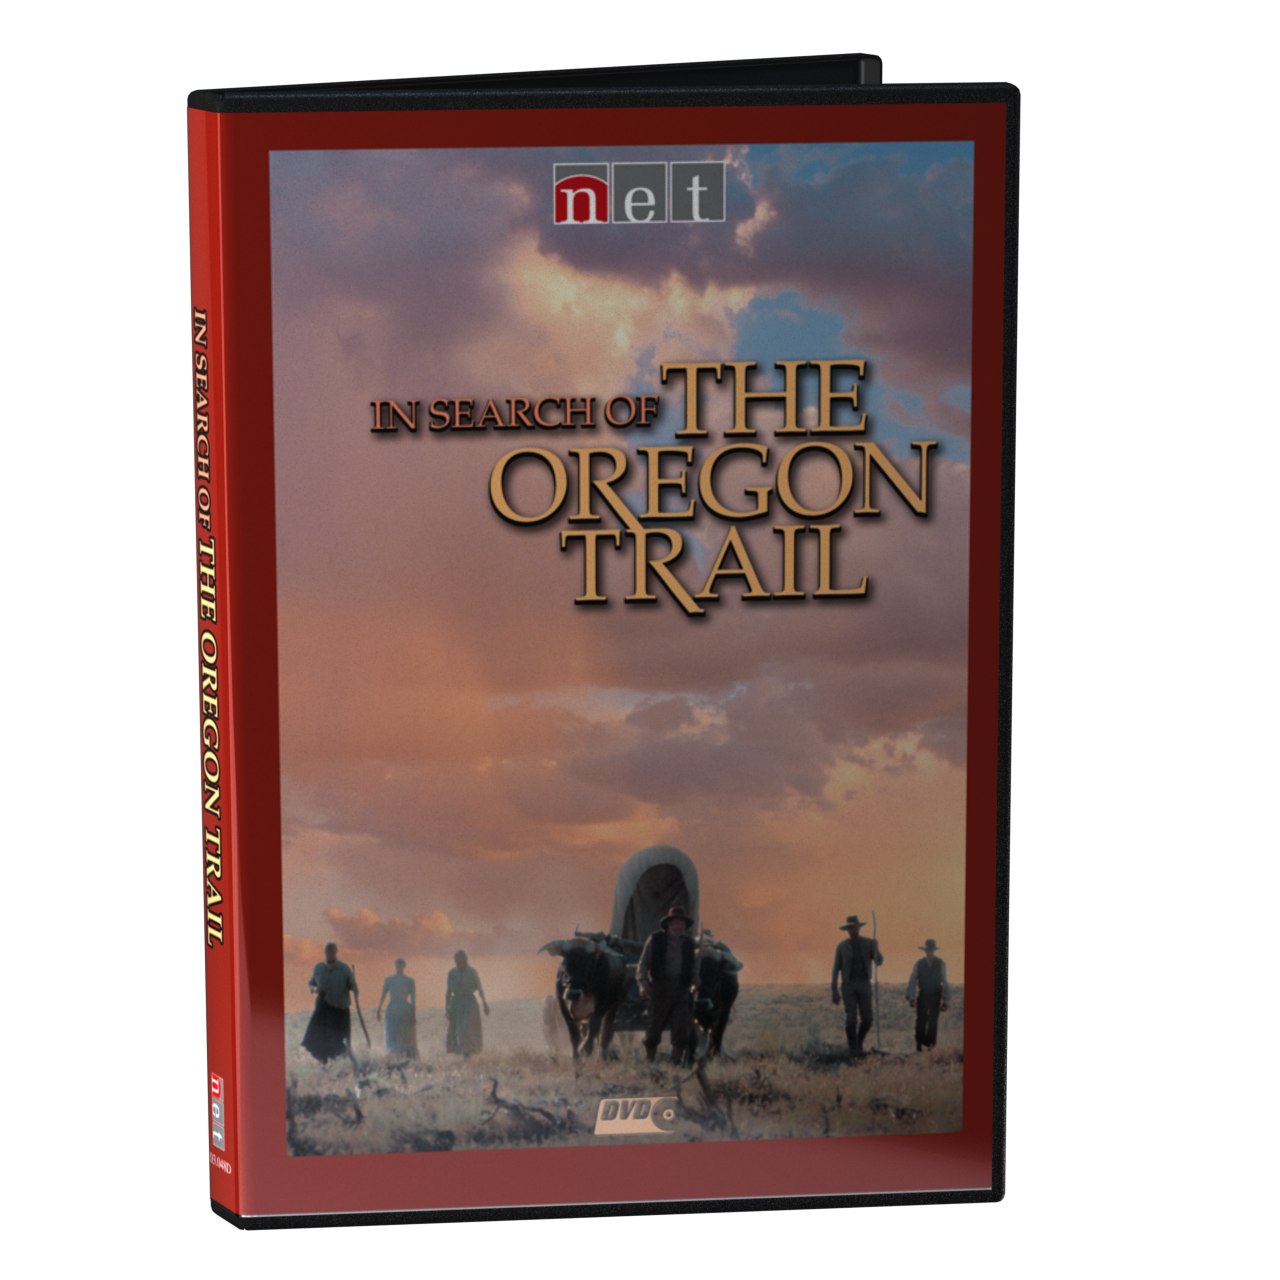 In Search of the Oregon Trail